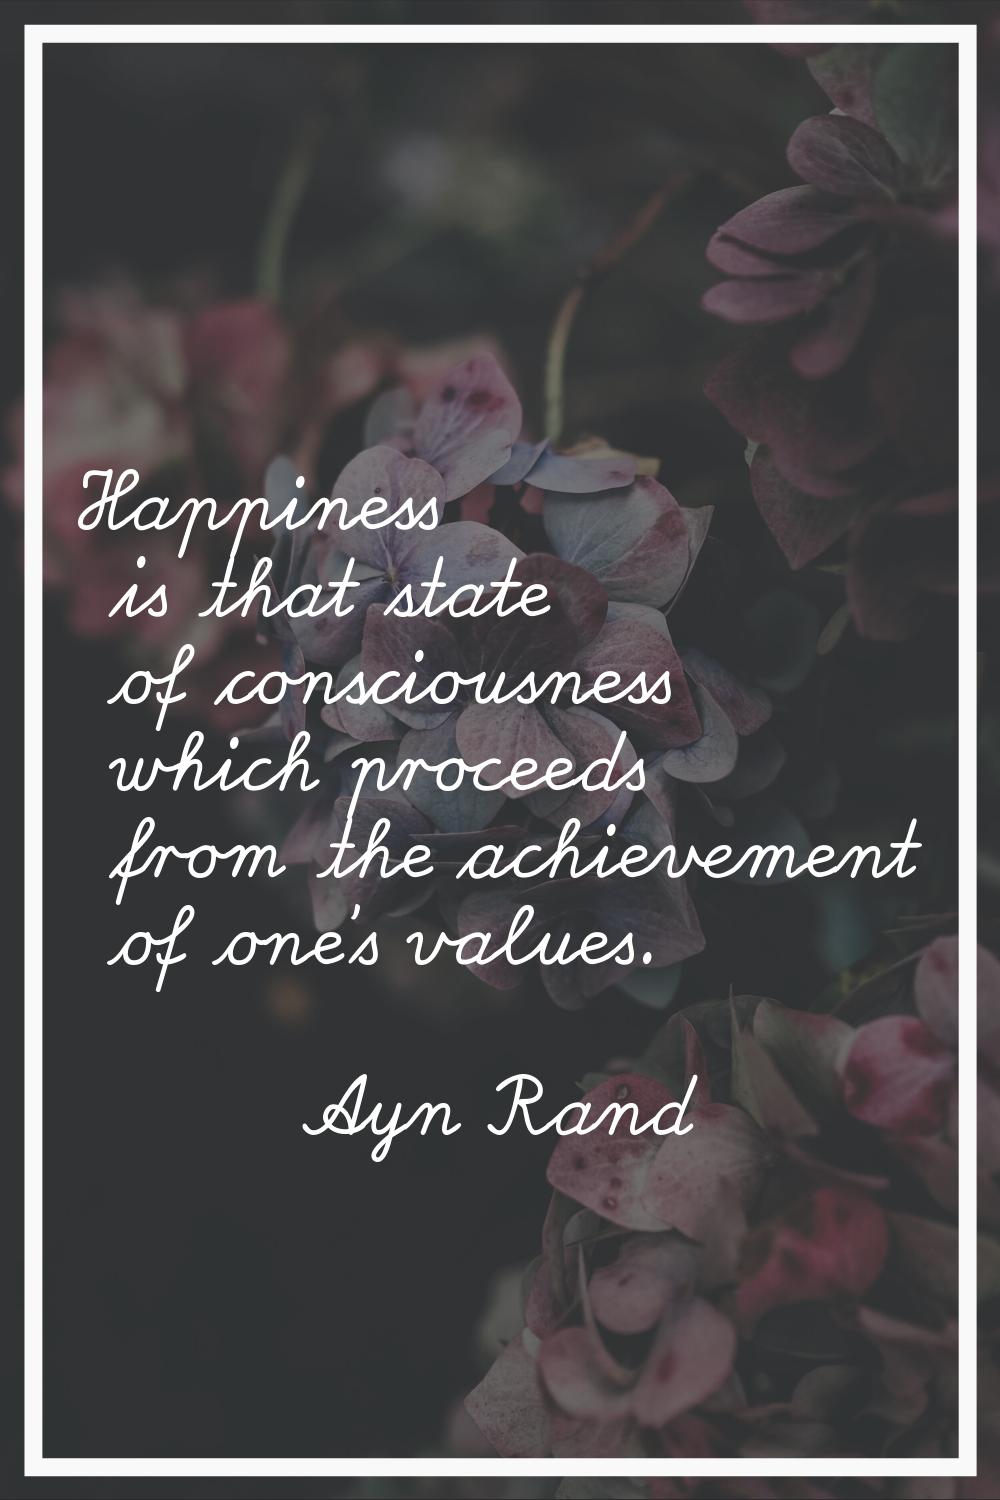 Happiness is that state of consciousness which proceeds from the achievement of one's values.